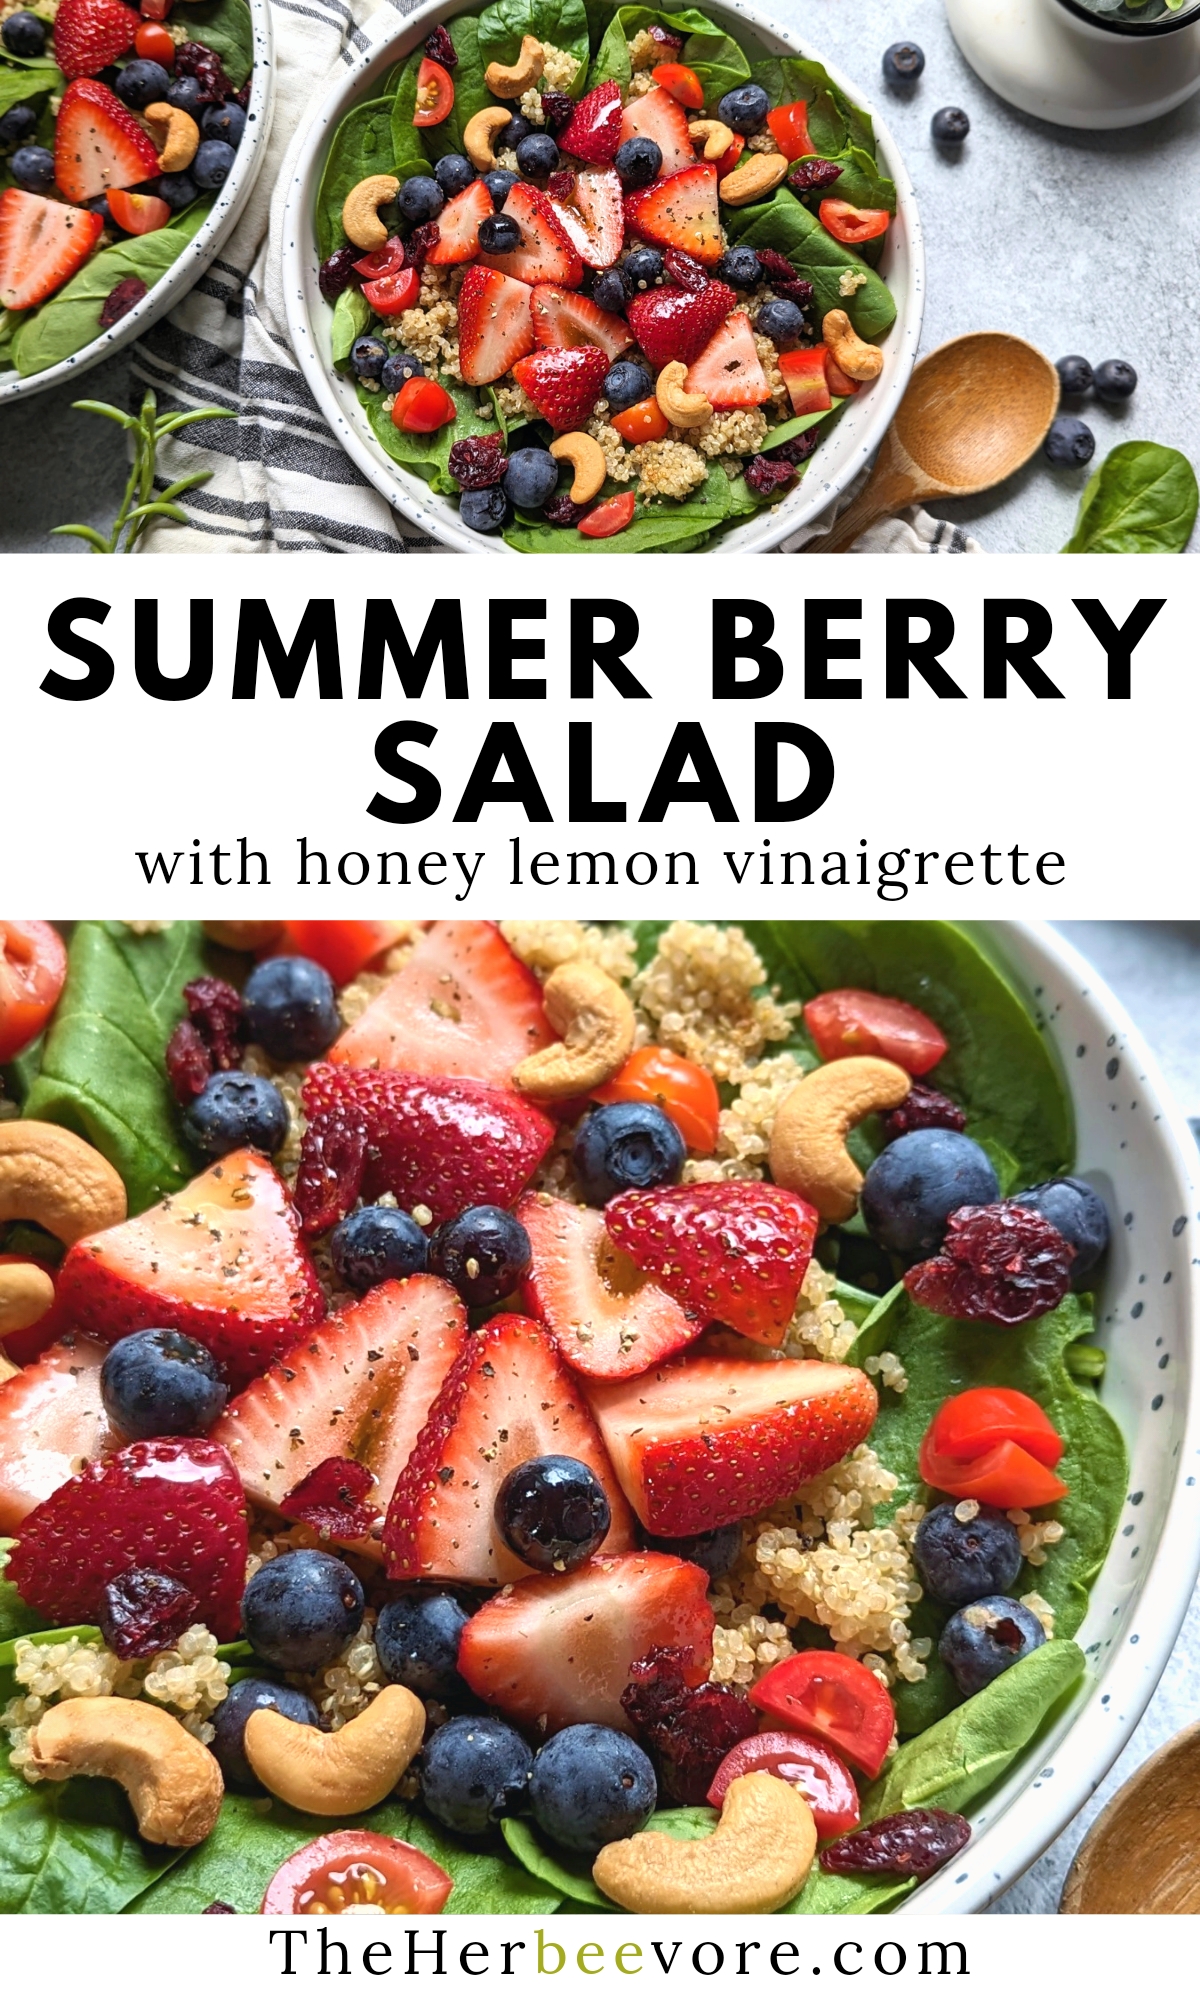 summer berry salad with honey lemon vinaigrette dressing cranberries and cashews and quinoa over spinach greens